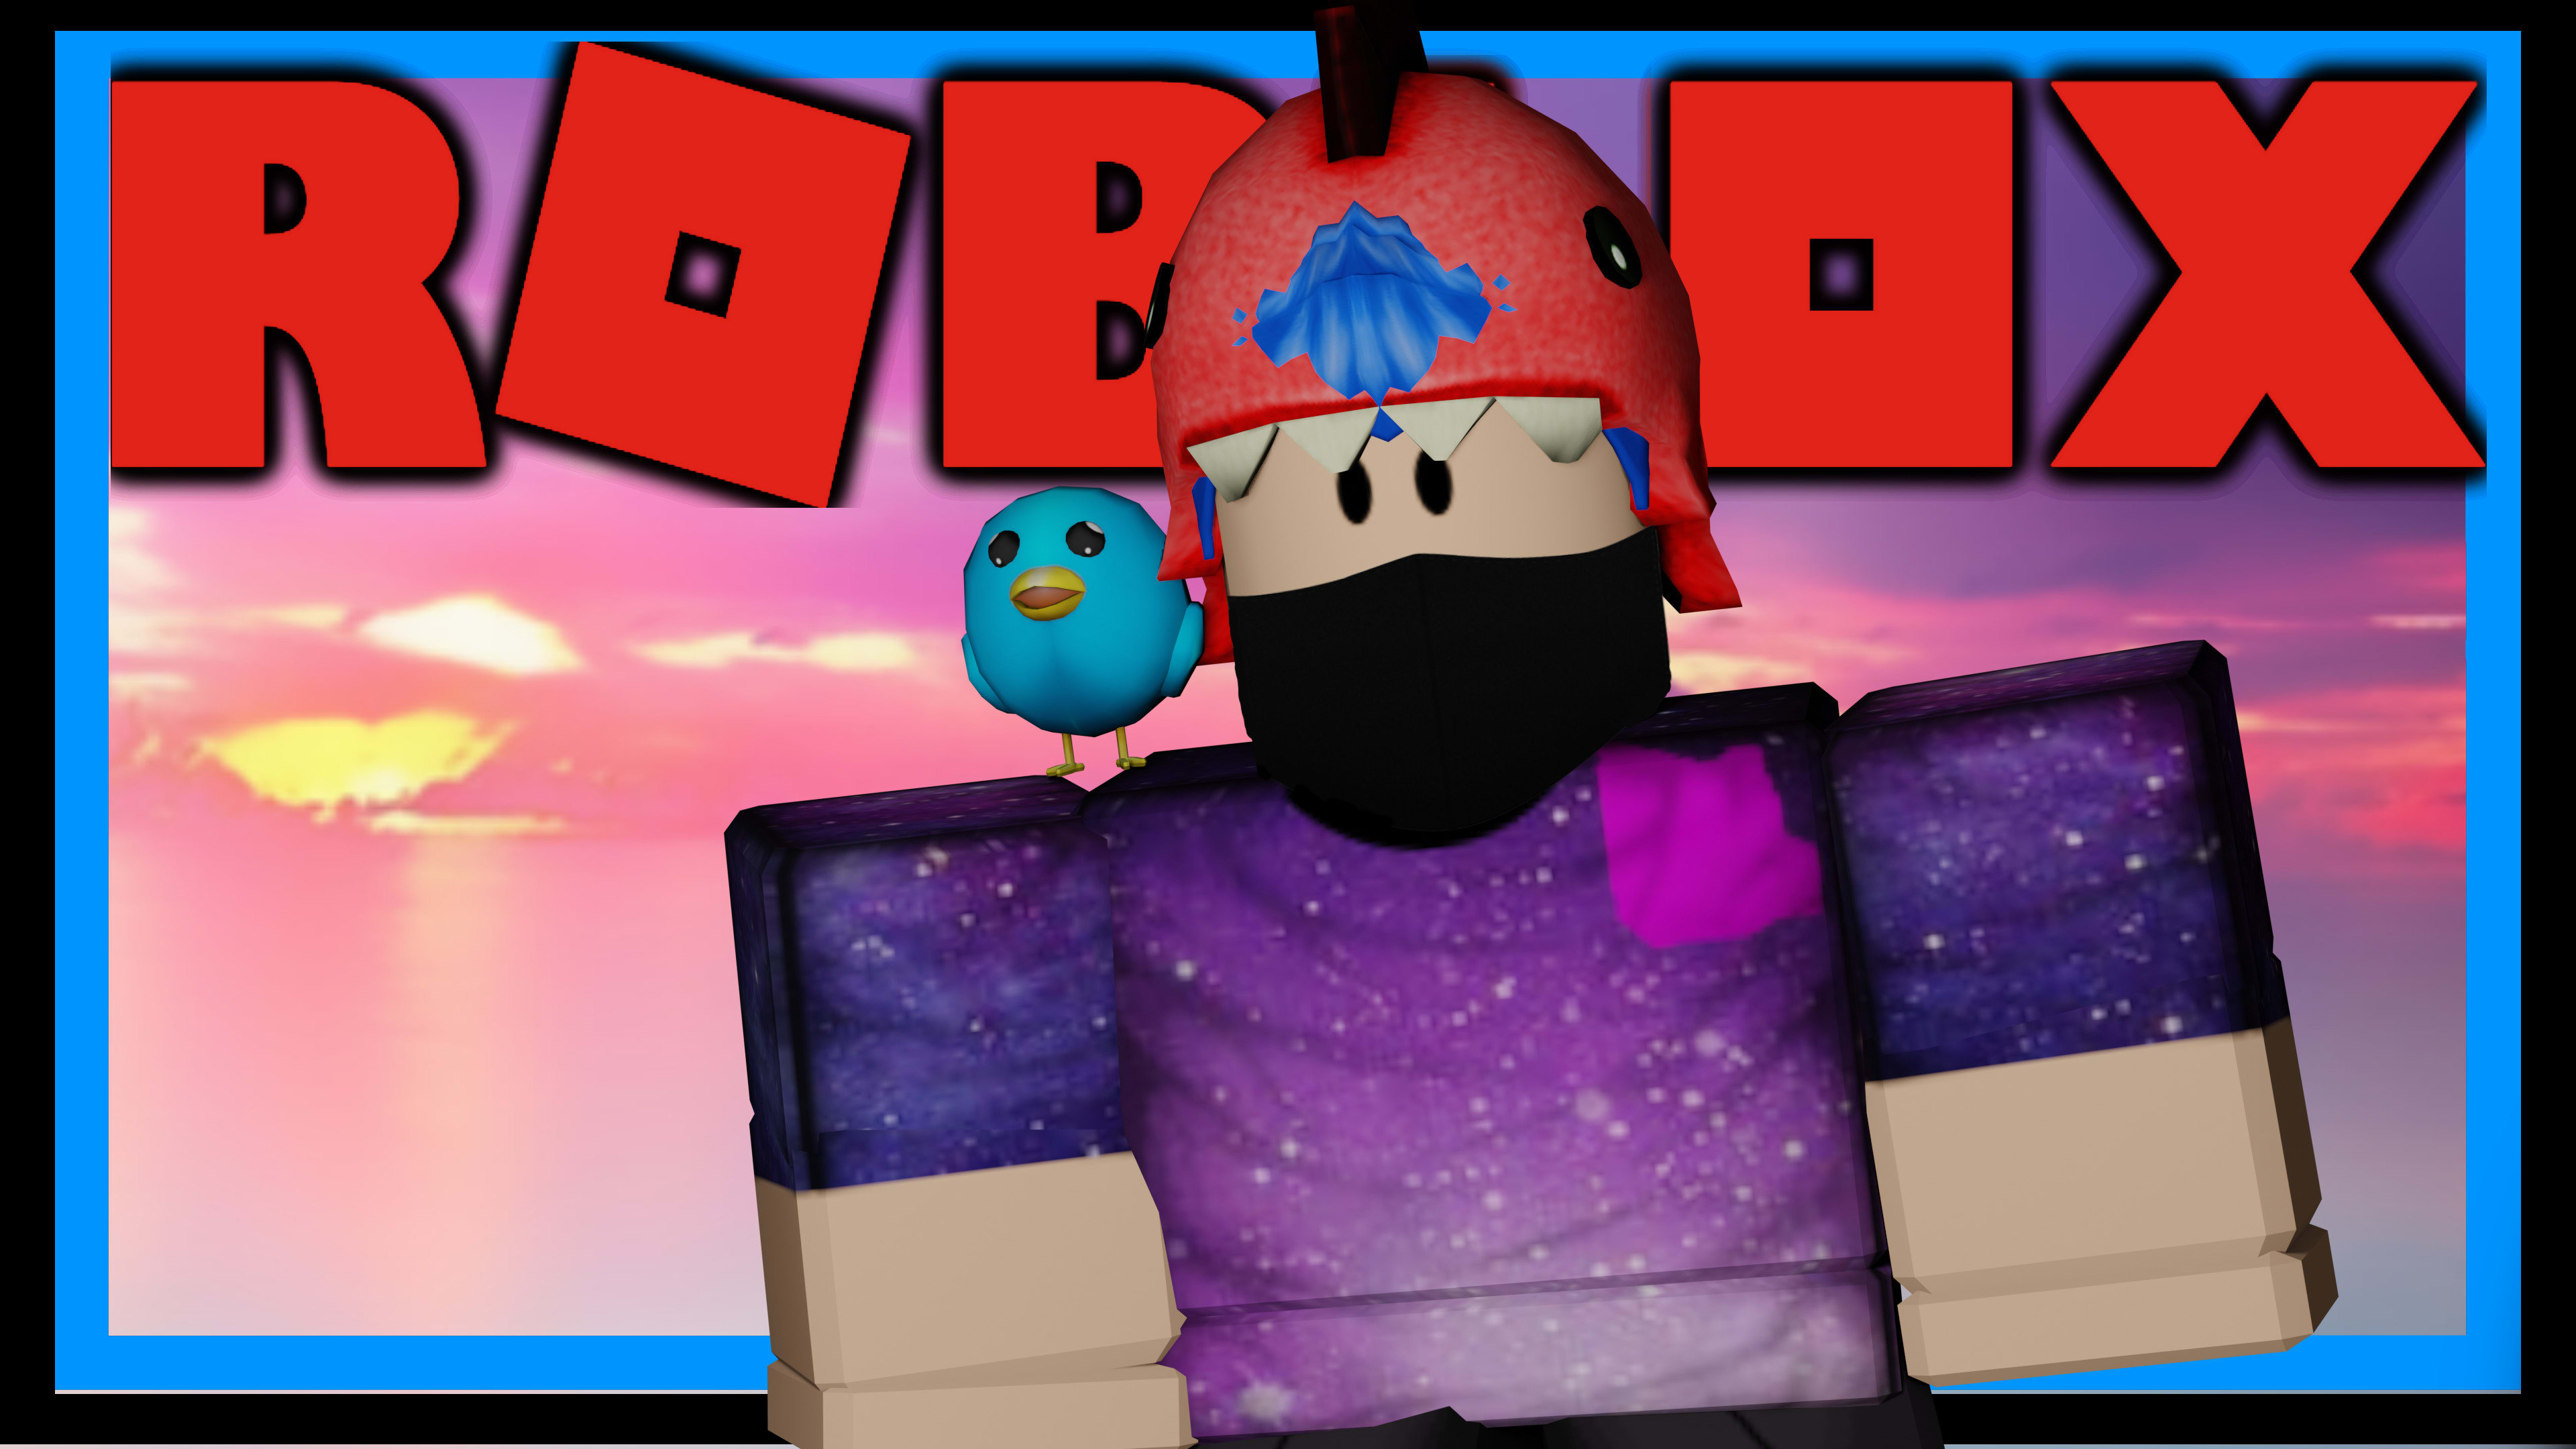 Make You A Roblox Thumbnail With Good Graphics By Happymr Doggo Fiverr - how to get good graphics on roblox